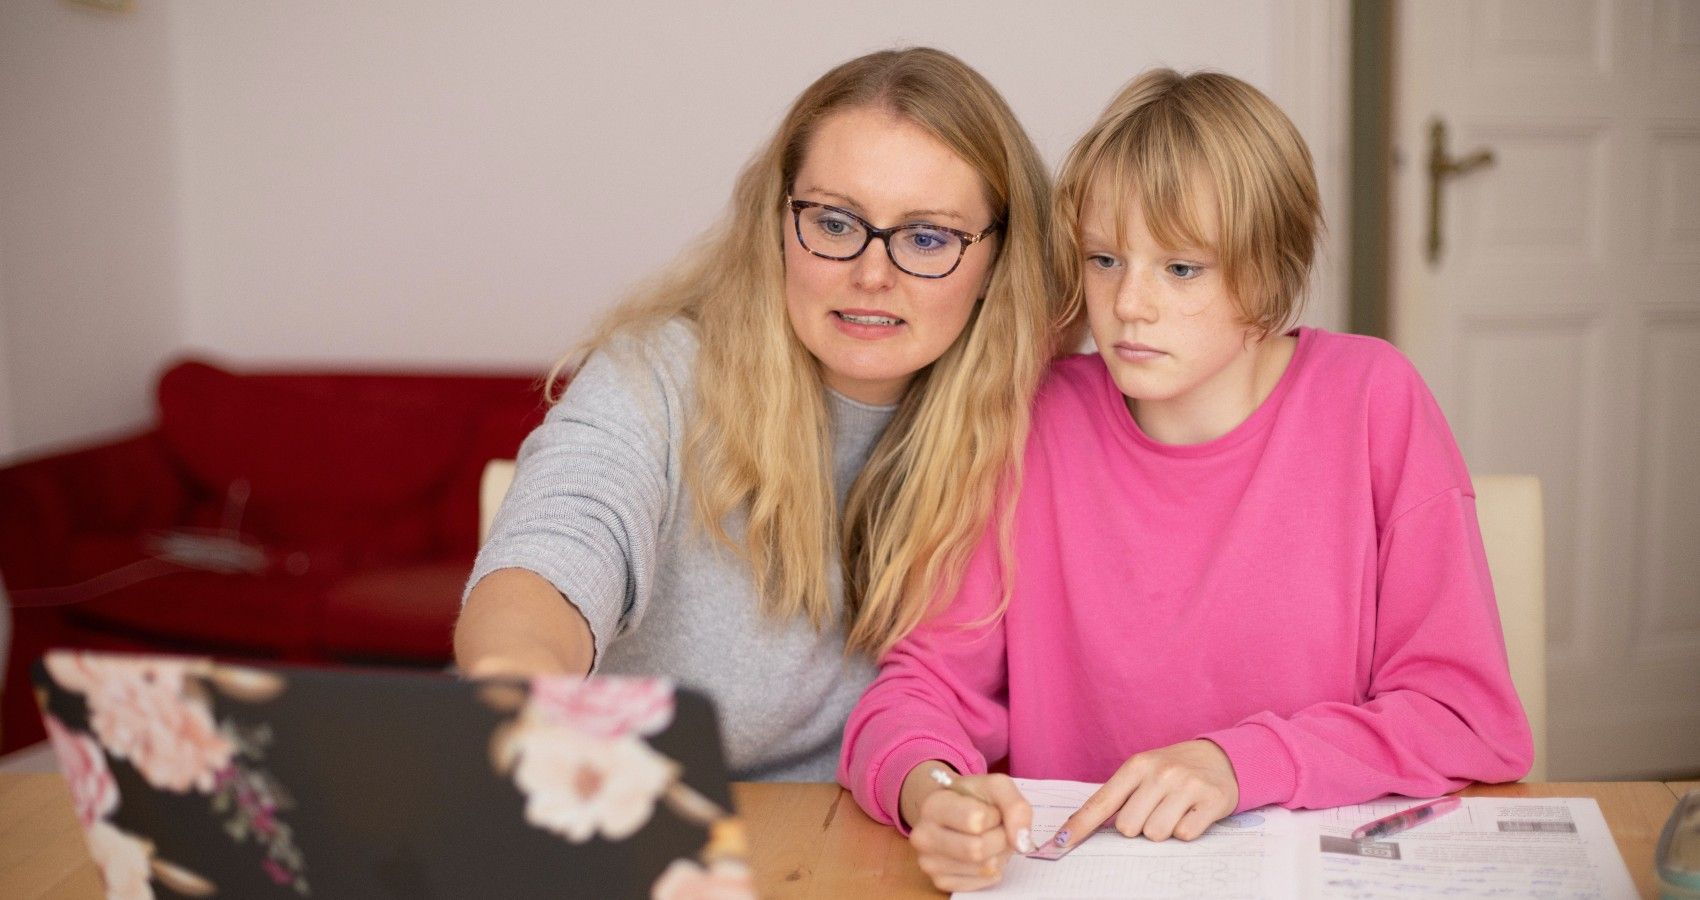 Finding The Right Tutor For Your Child